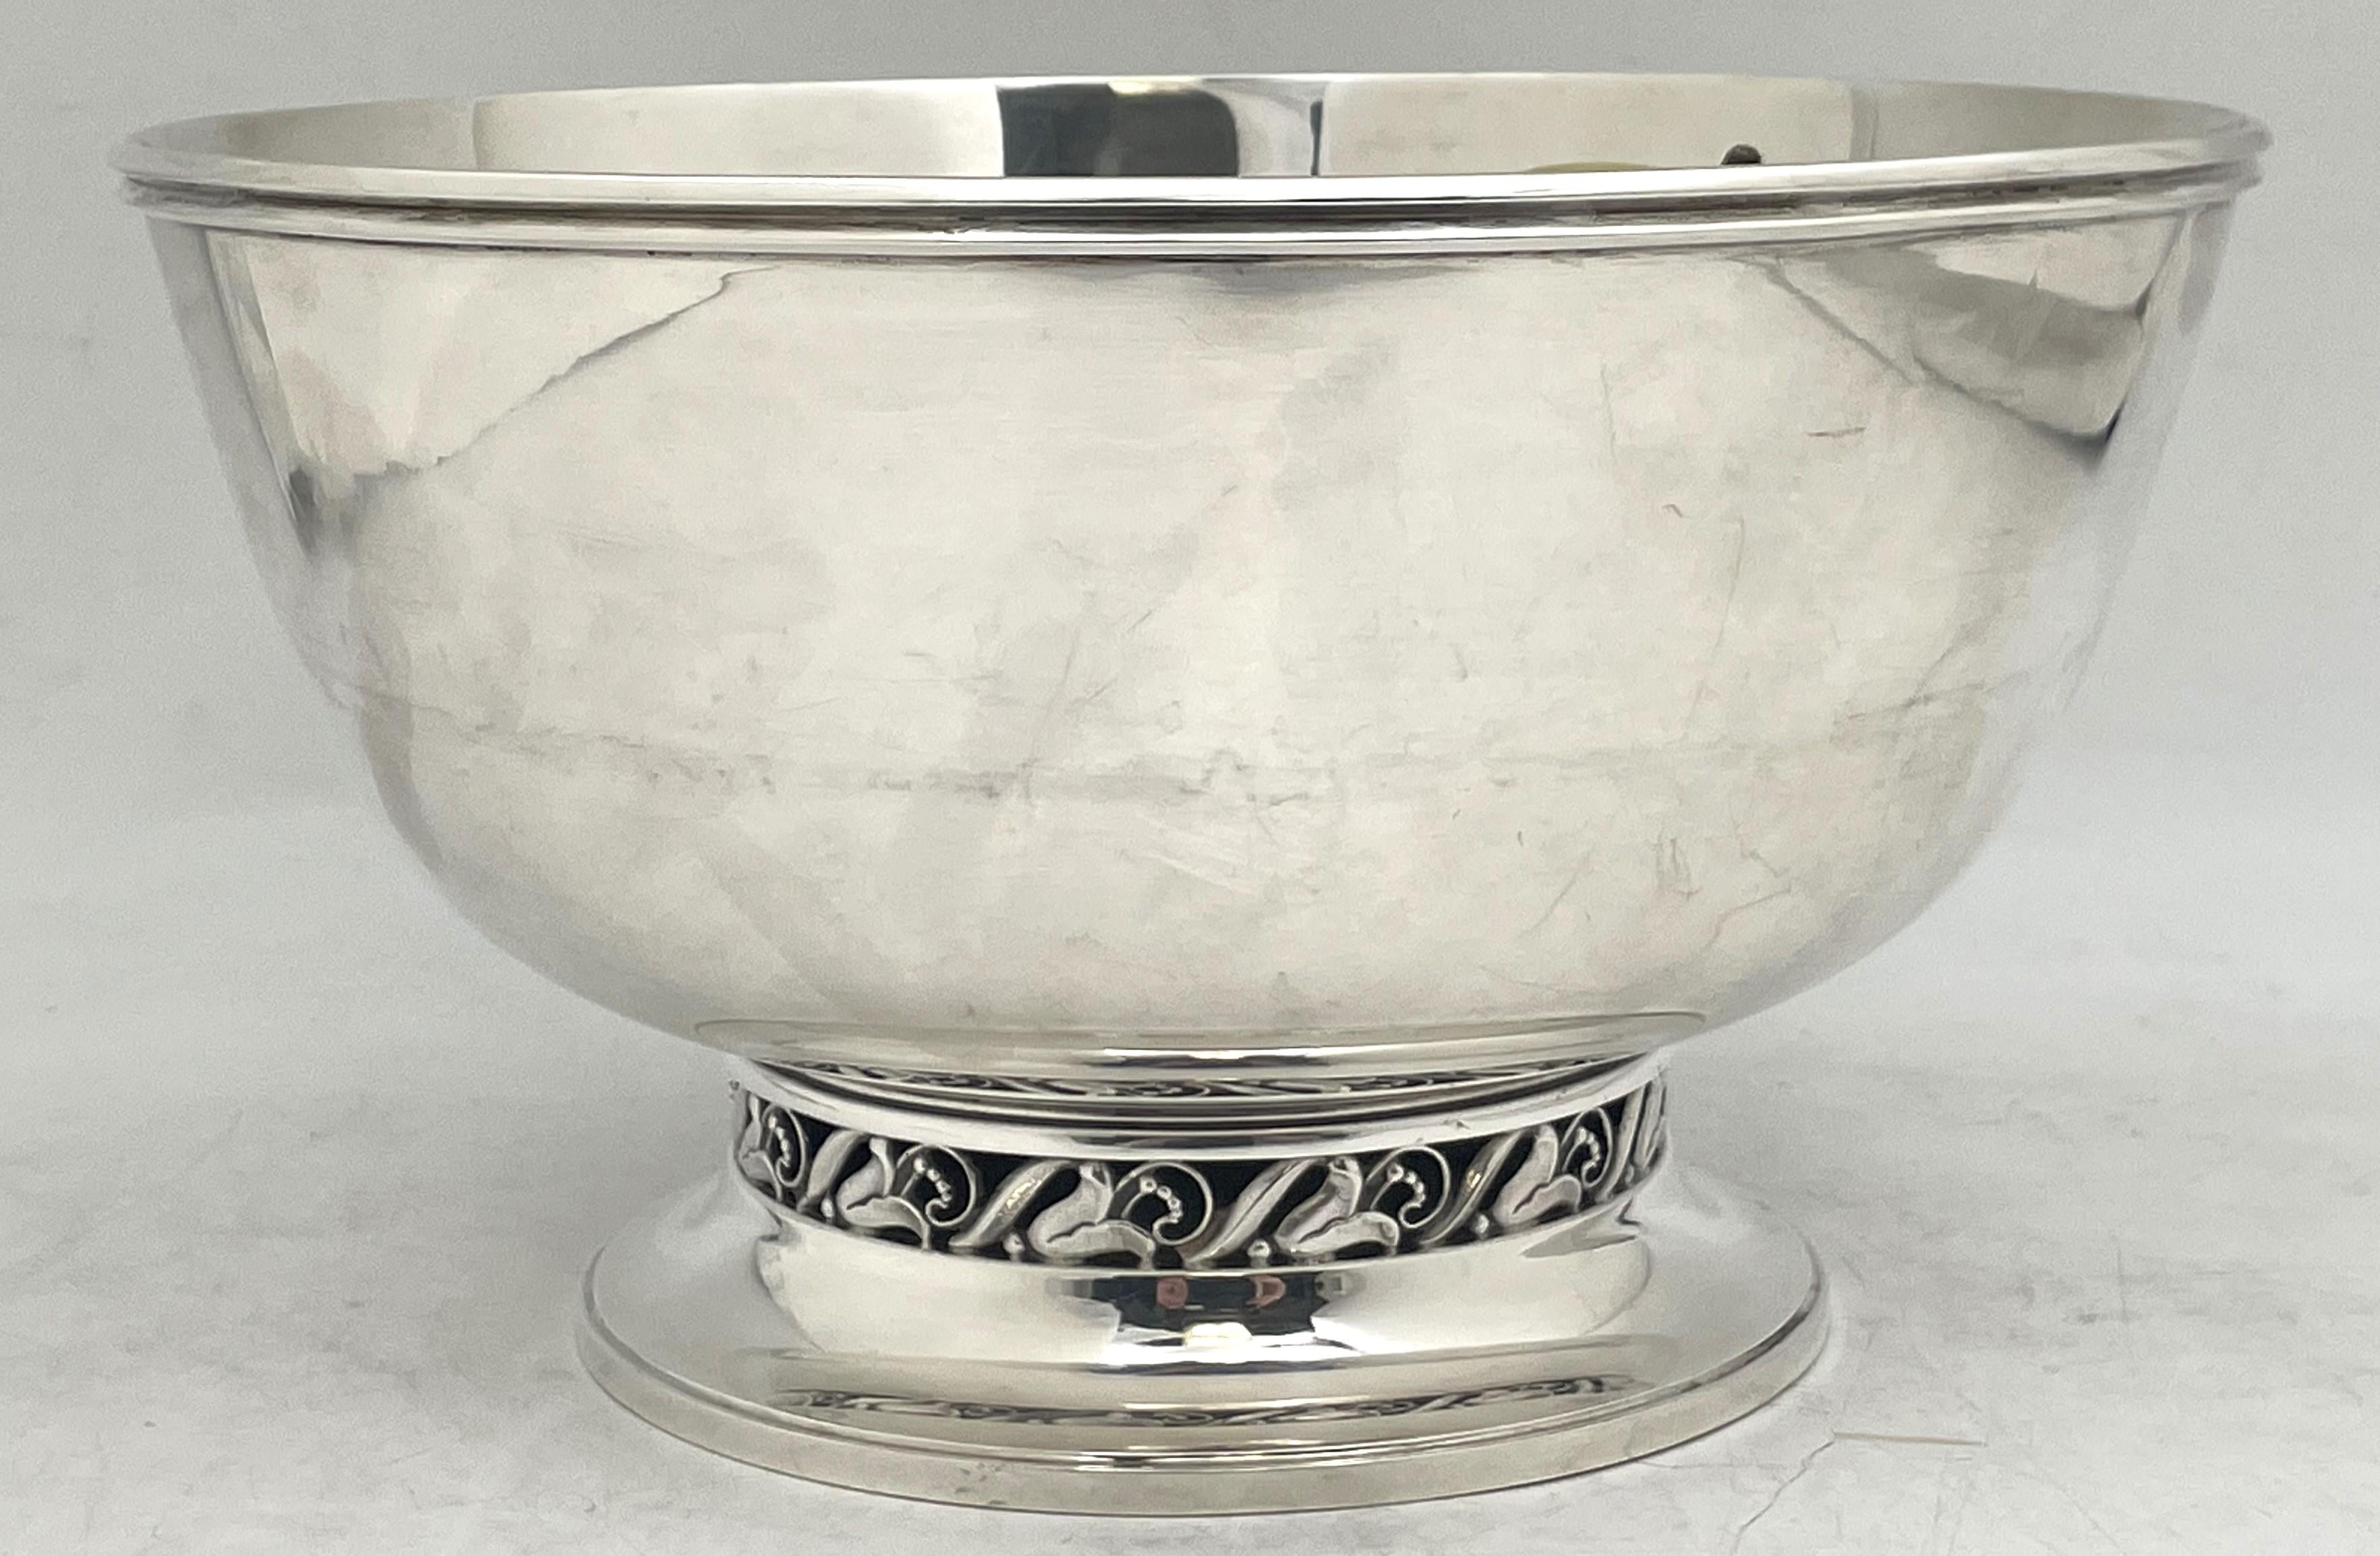 Designed by Alphonse La Paglia for International Sterling, sterling silver bowl, in Mid-Century Modern and in Georg Jensen style, with an elegant, geometric design, adorned with stylized and pierced floral motifs at the base. It measures 10'' in